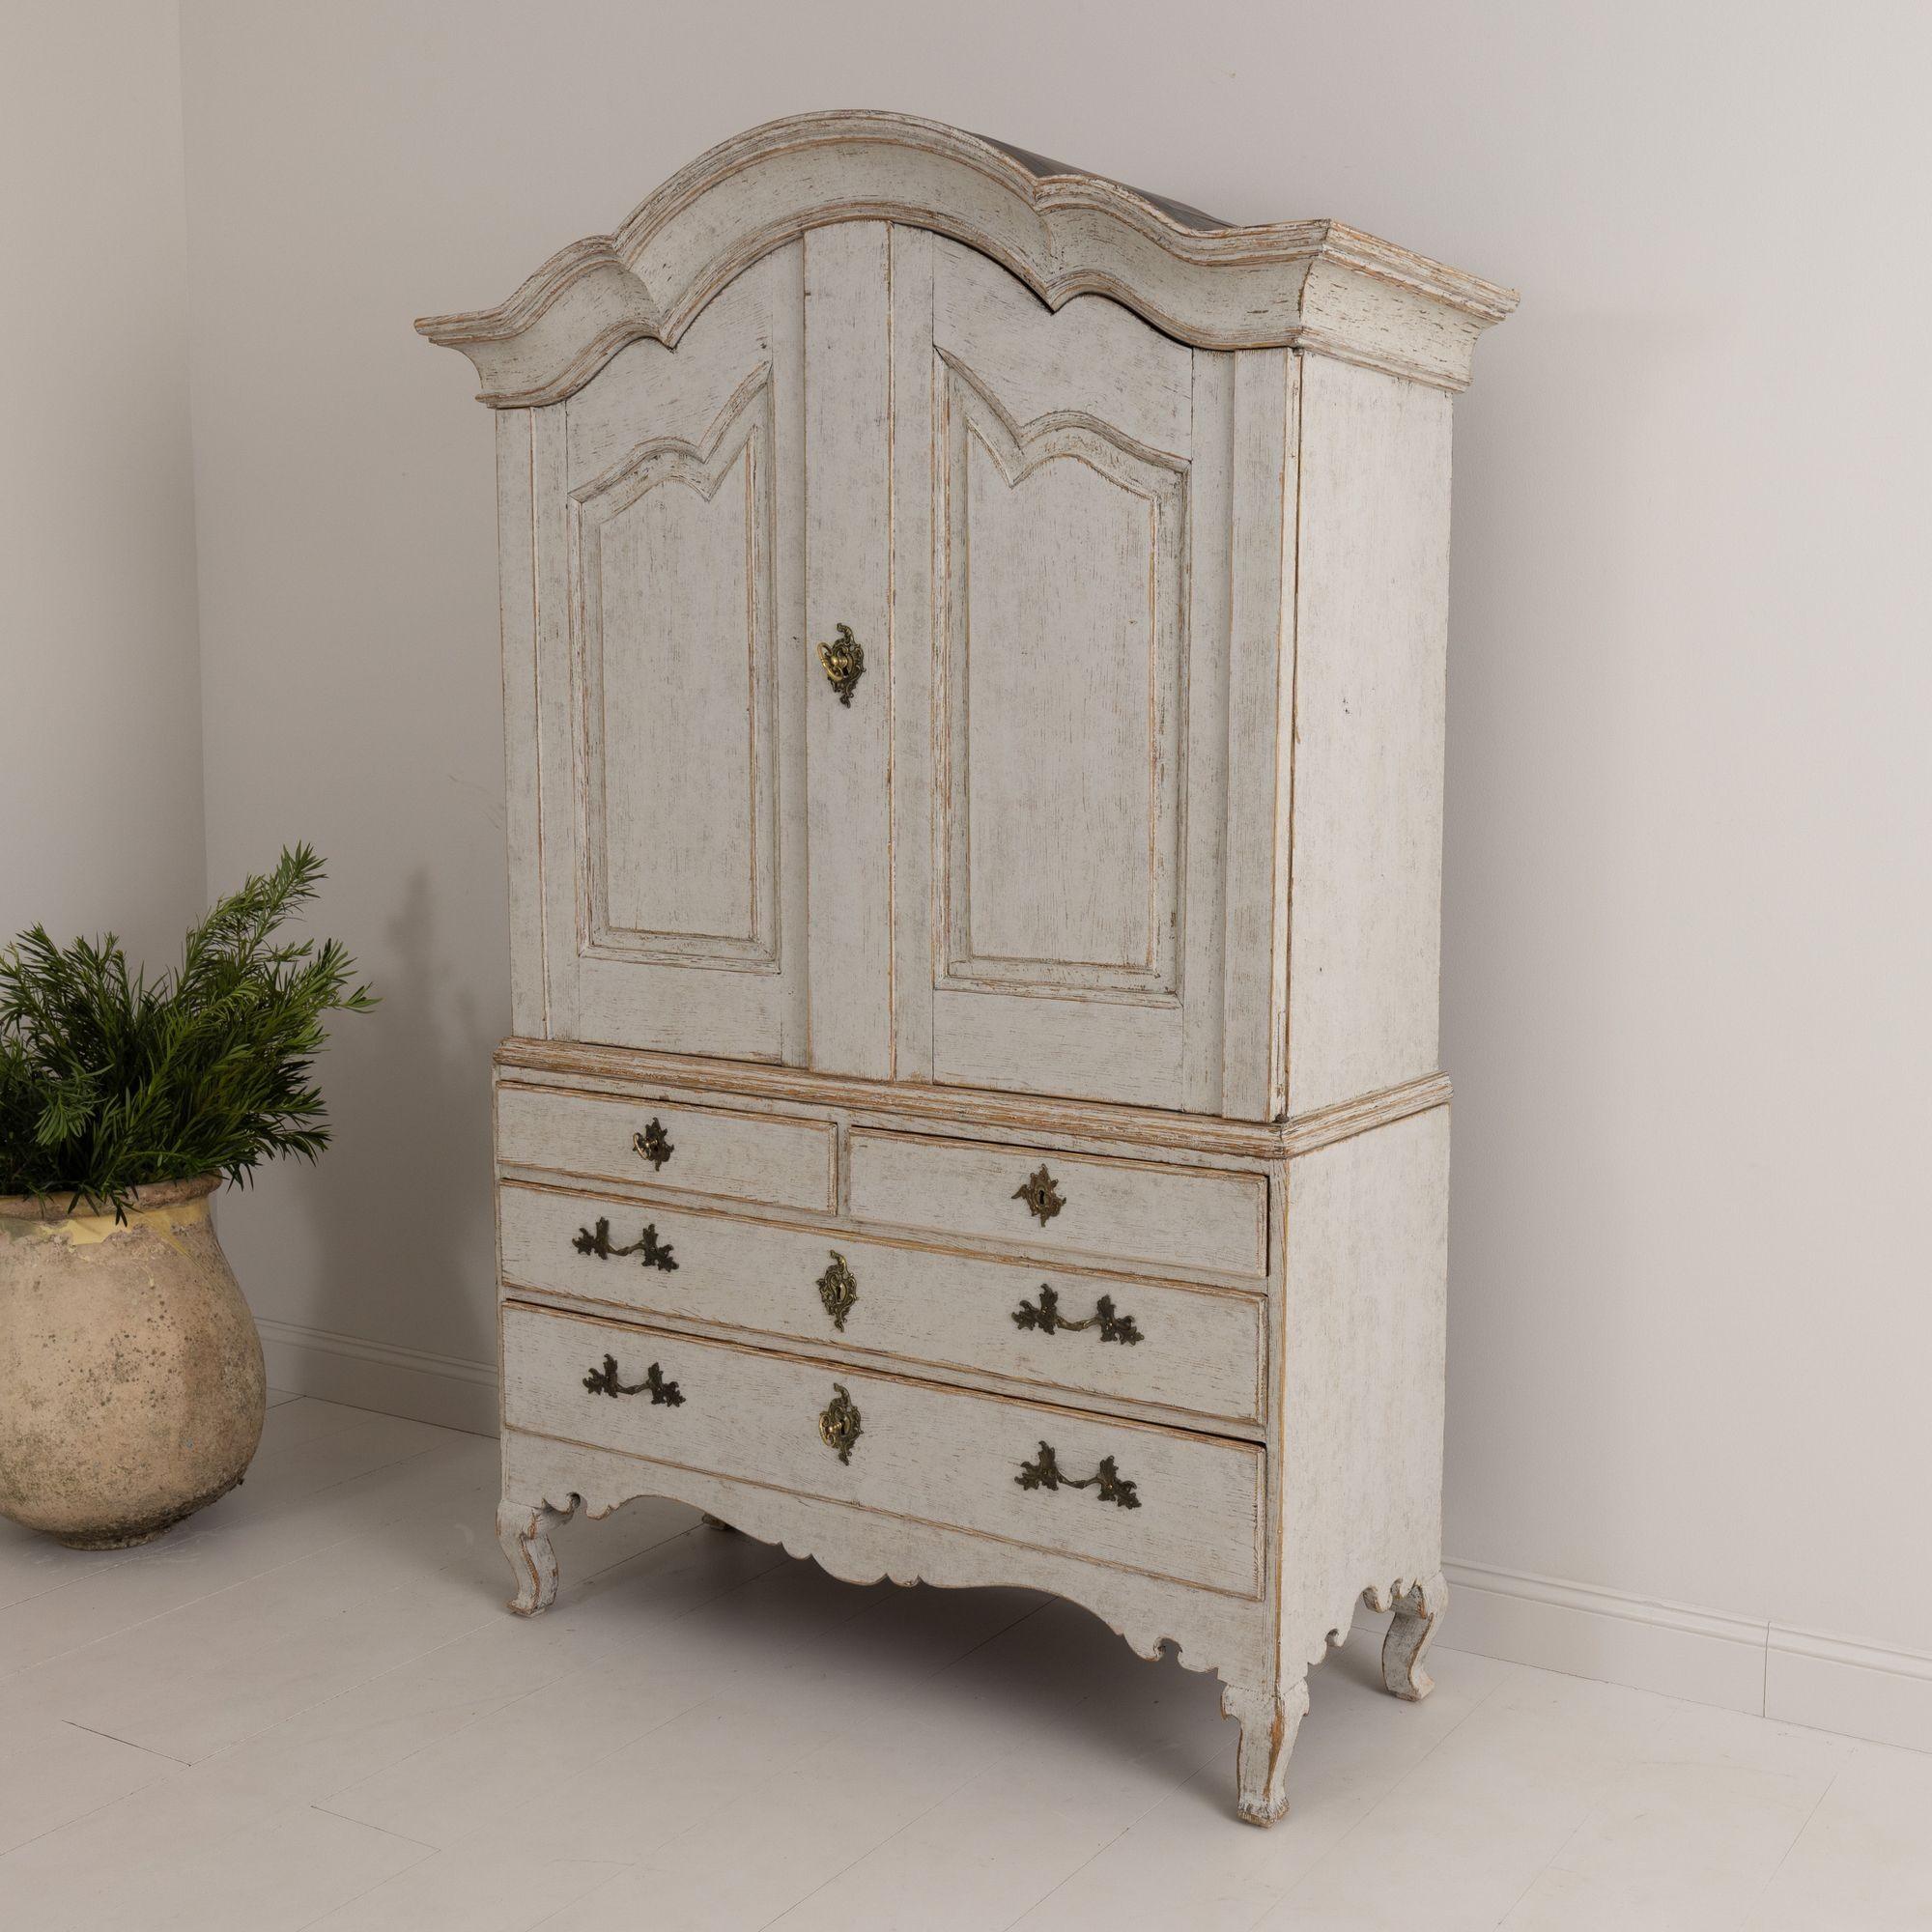 18th Century and Earlier 18th c. Swedish Rococo Period Painted Linen Press Cabinet